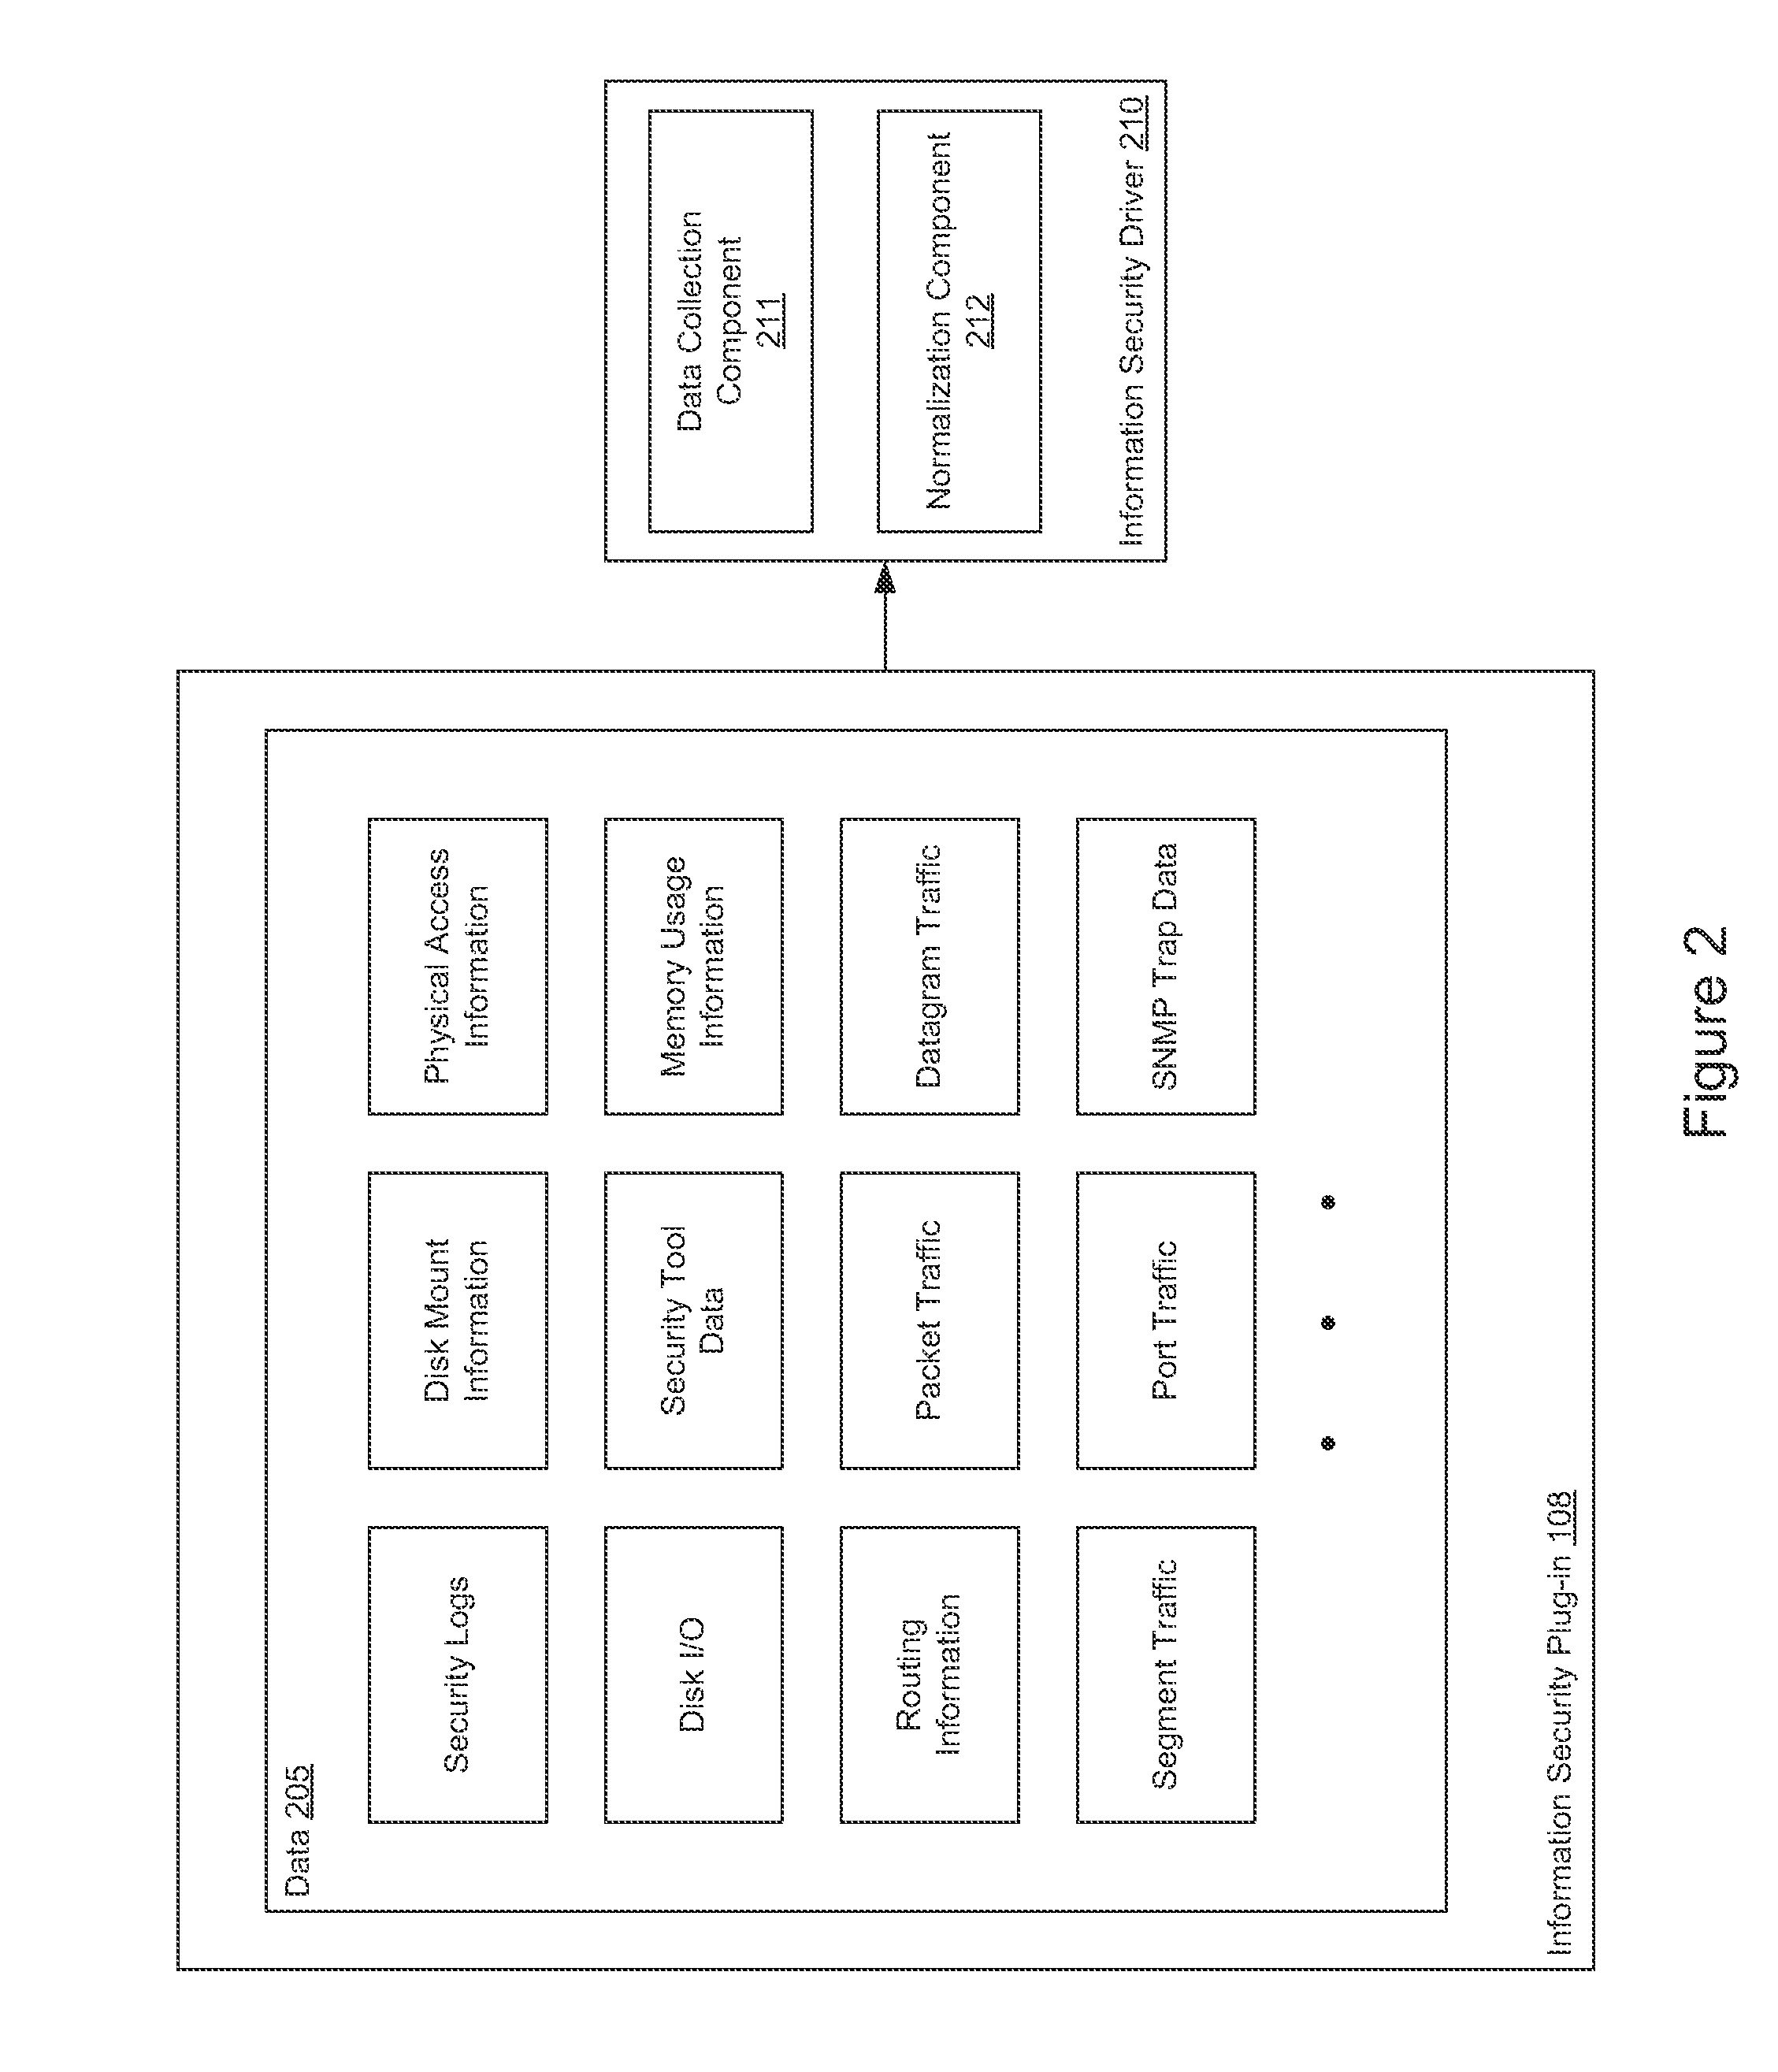 Cognitive information security using a behavioral recognition system